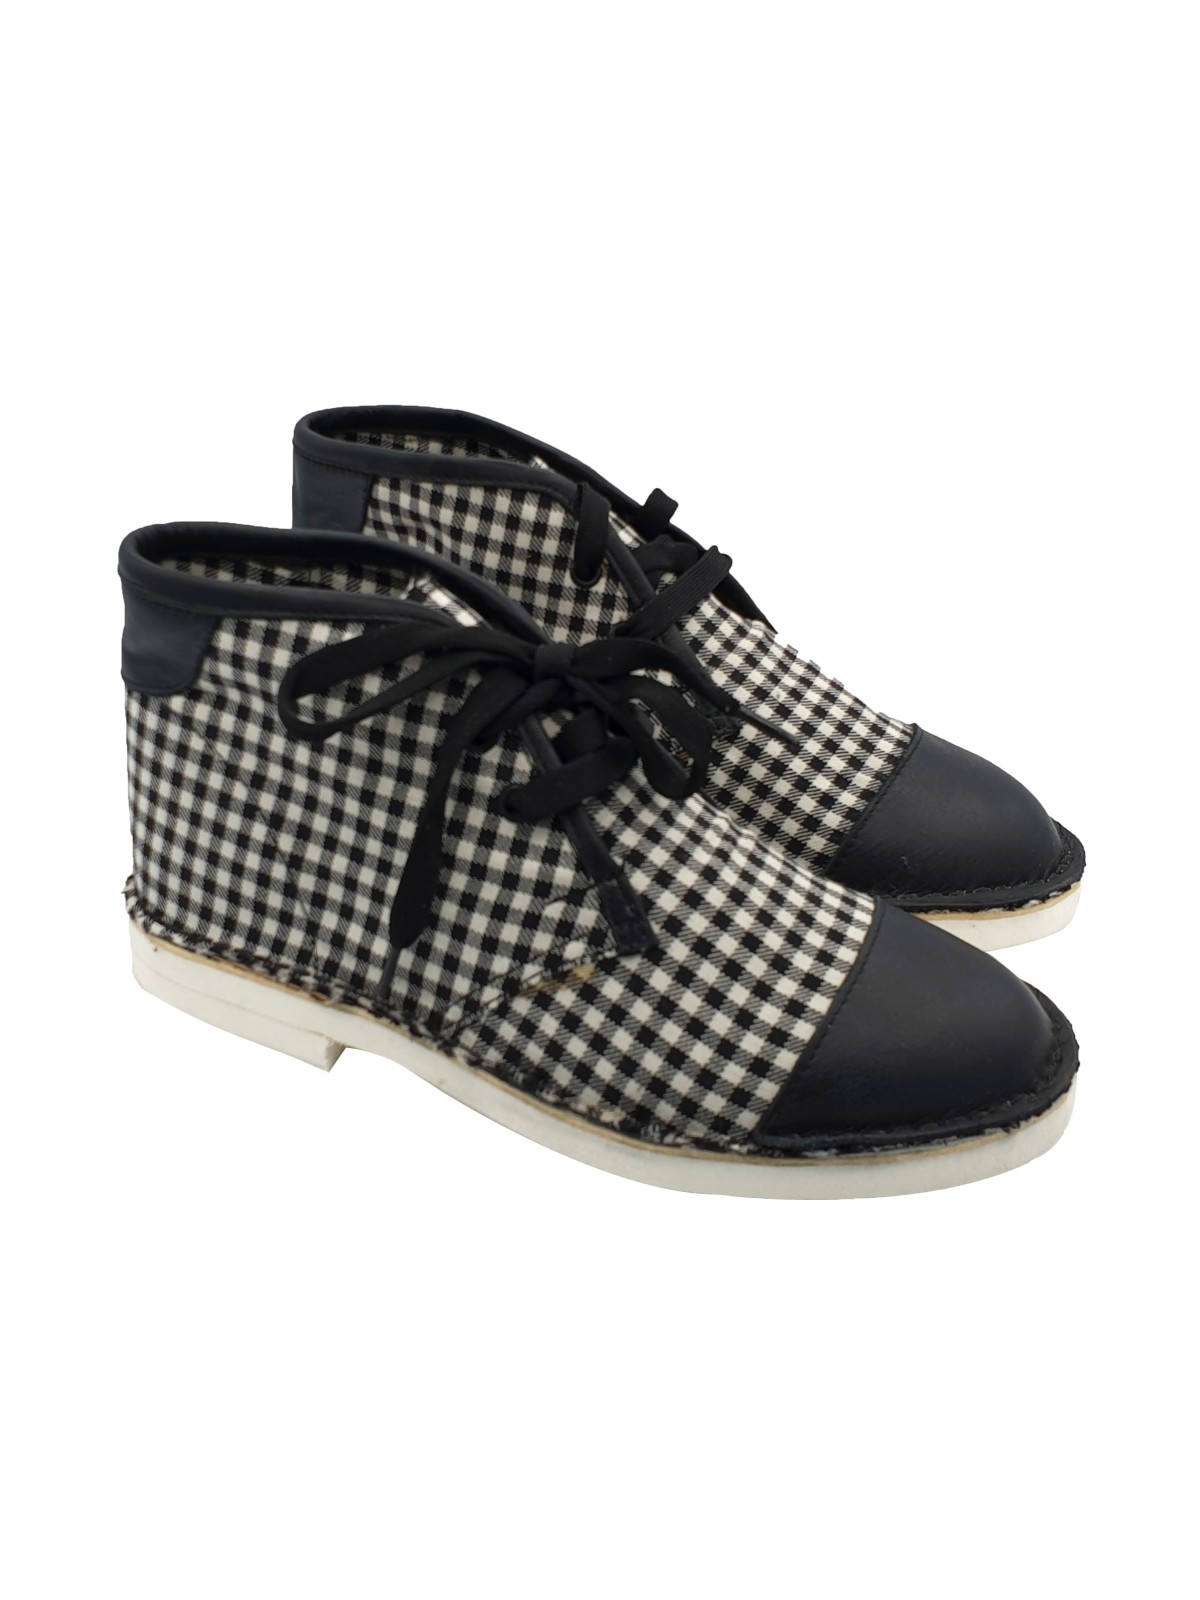 BLACK AND WHITE WOMAN ANKLE BOOT WITH LACES - size 37